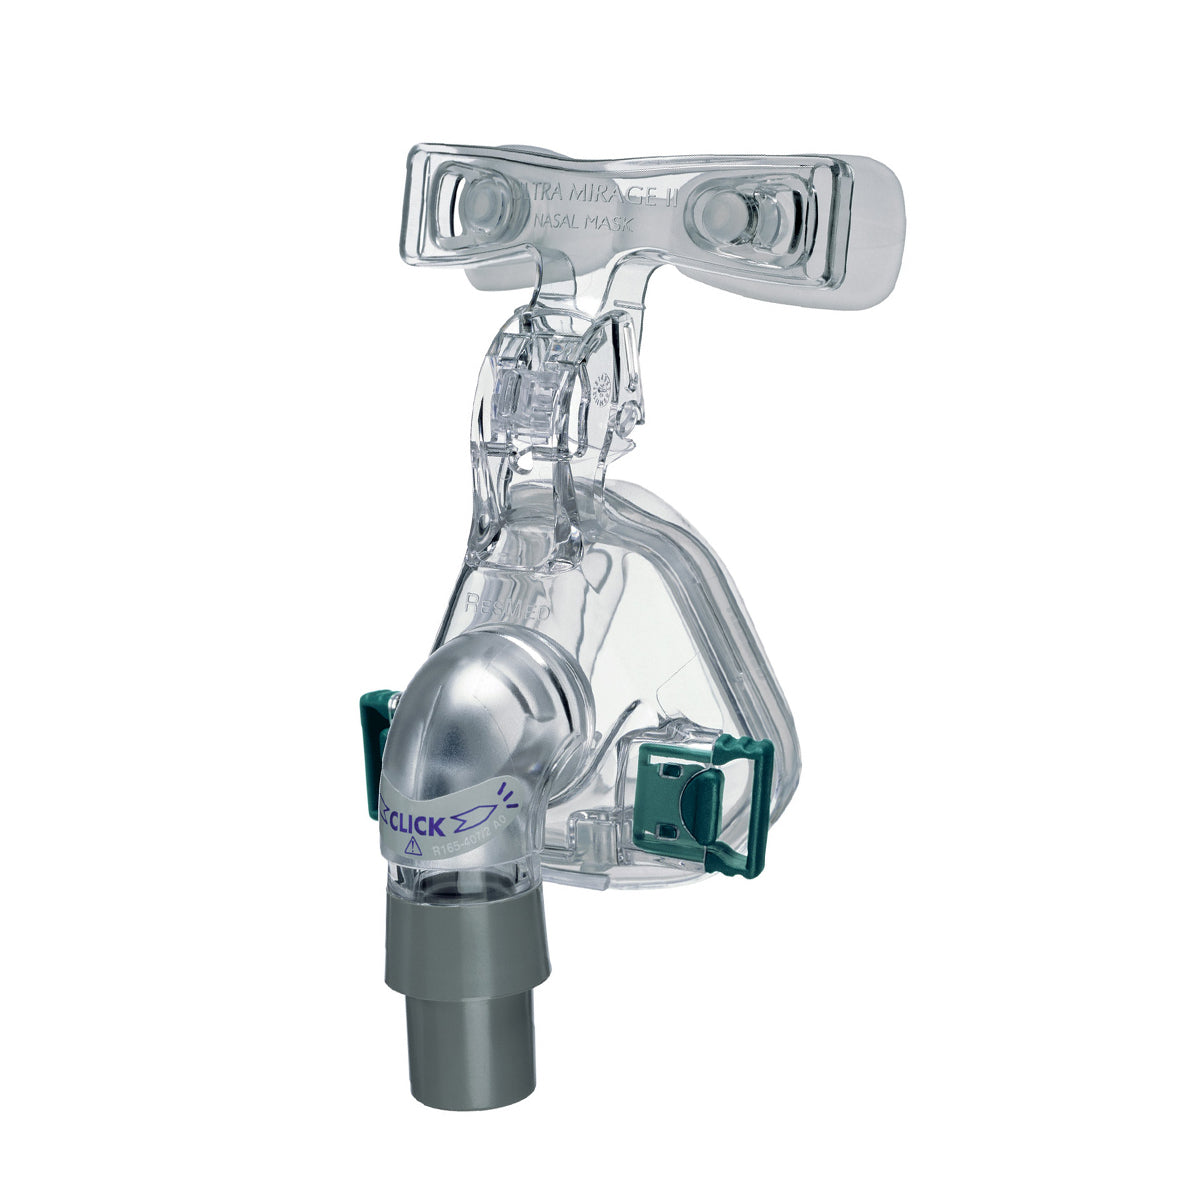 Side view of clear mask with tube connector of the Ultra Mirage II Nasal CPAP Mask by ResMed.